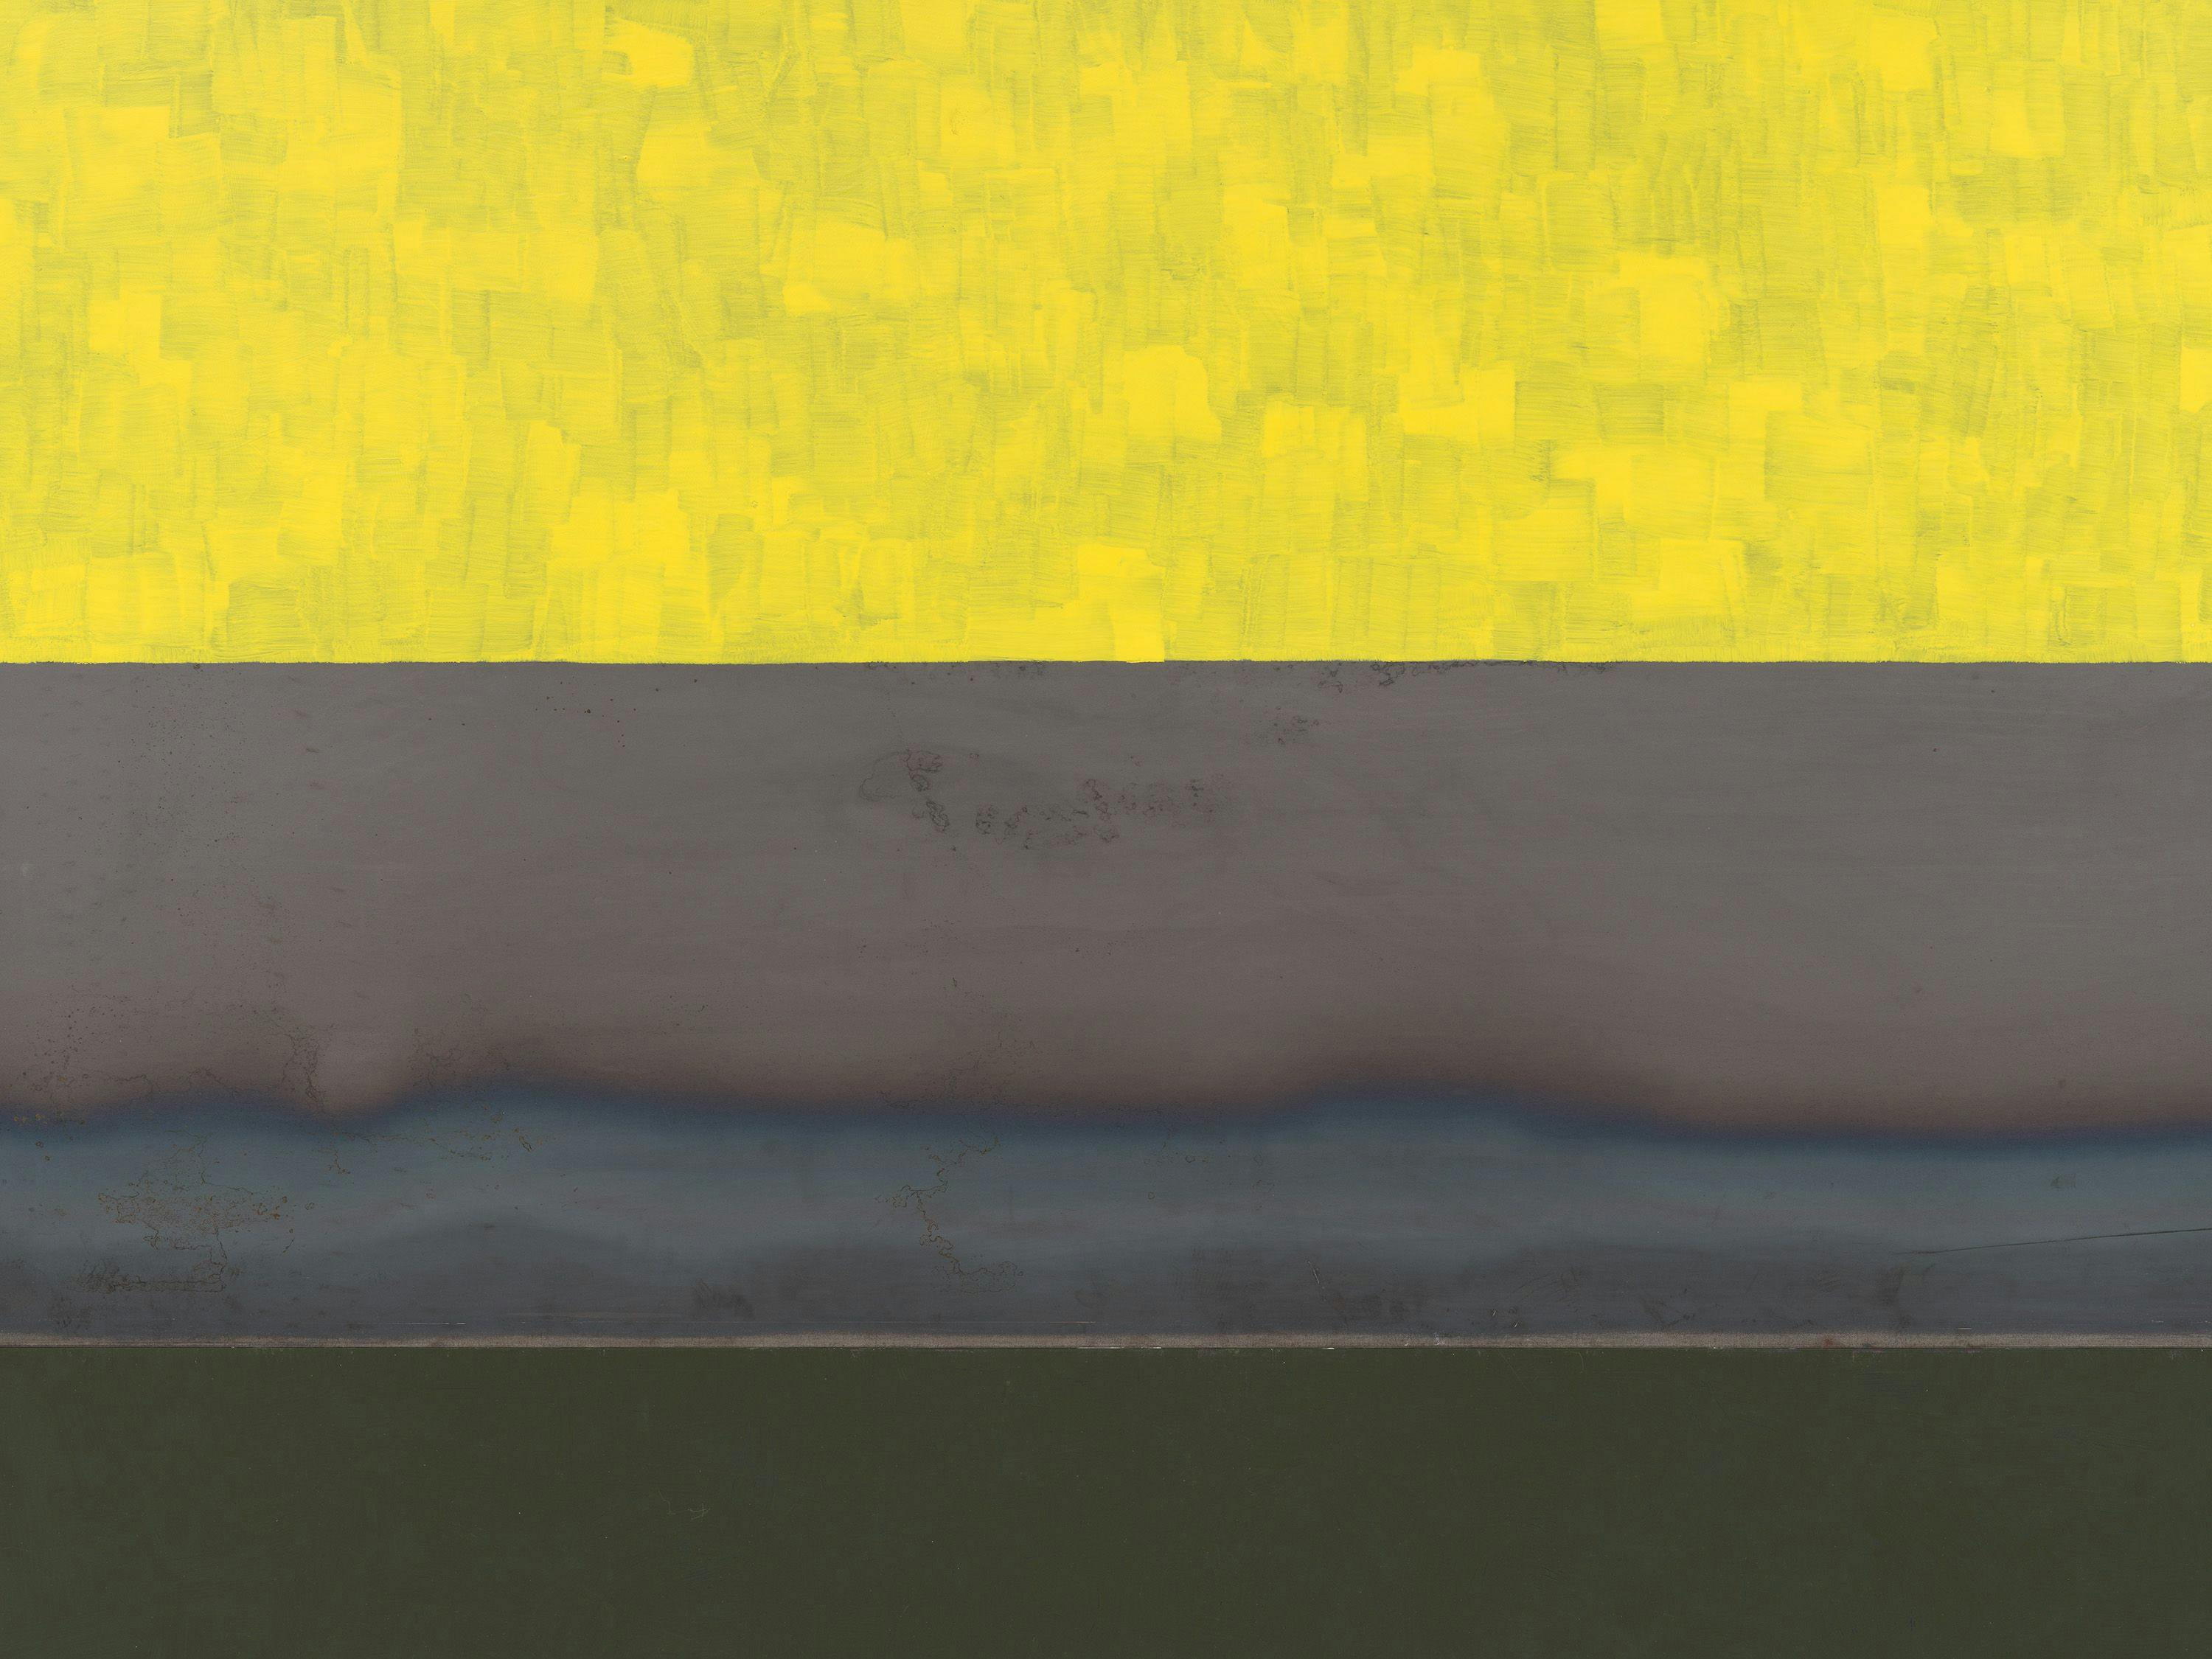 A detail from a painting by Merrill Wagner, titled Assertion, dated 2006.